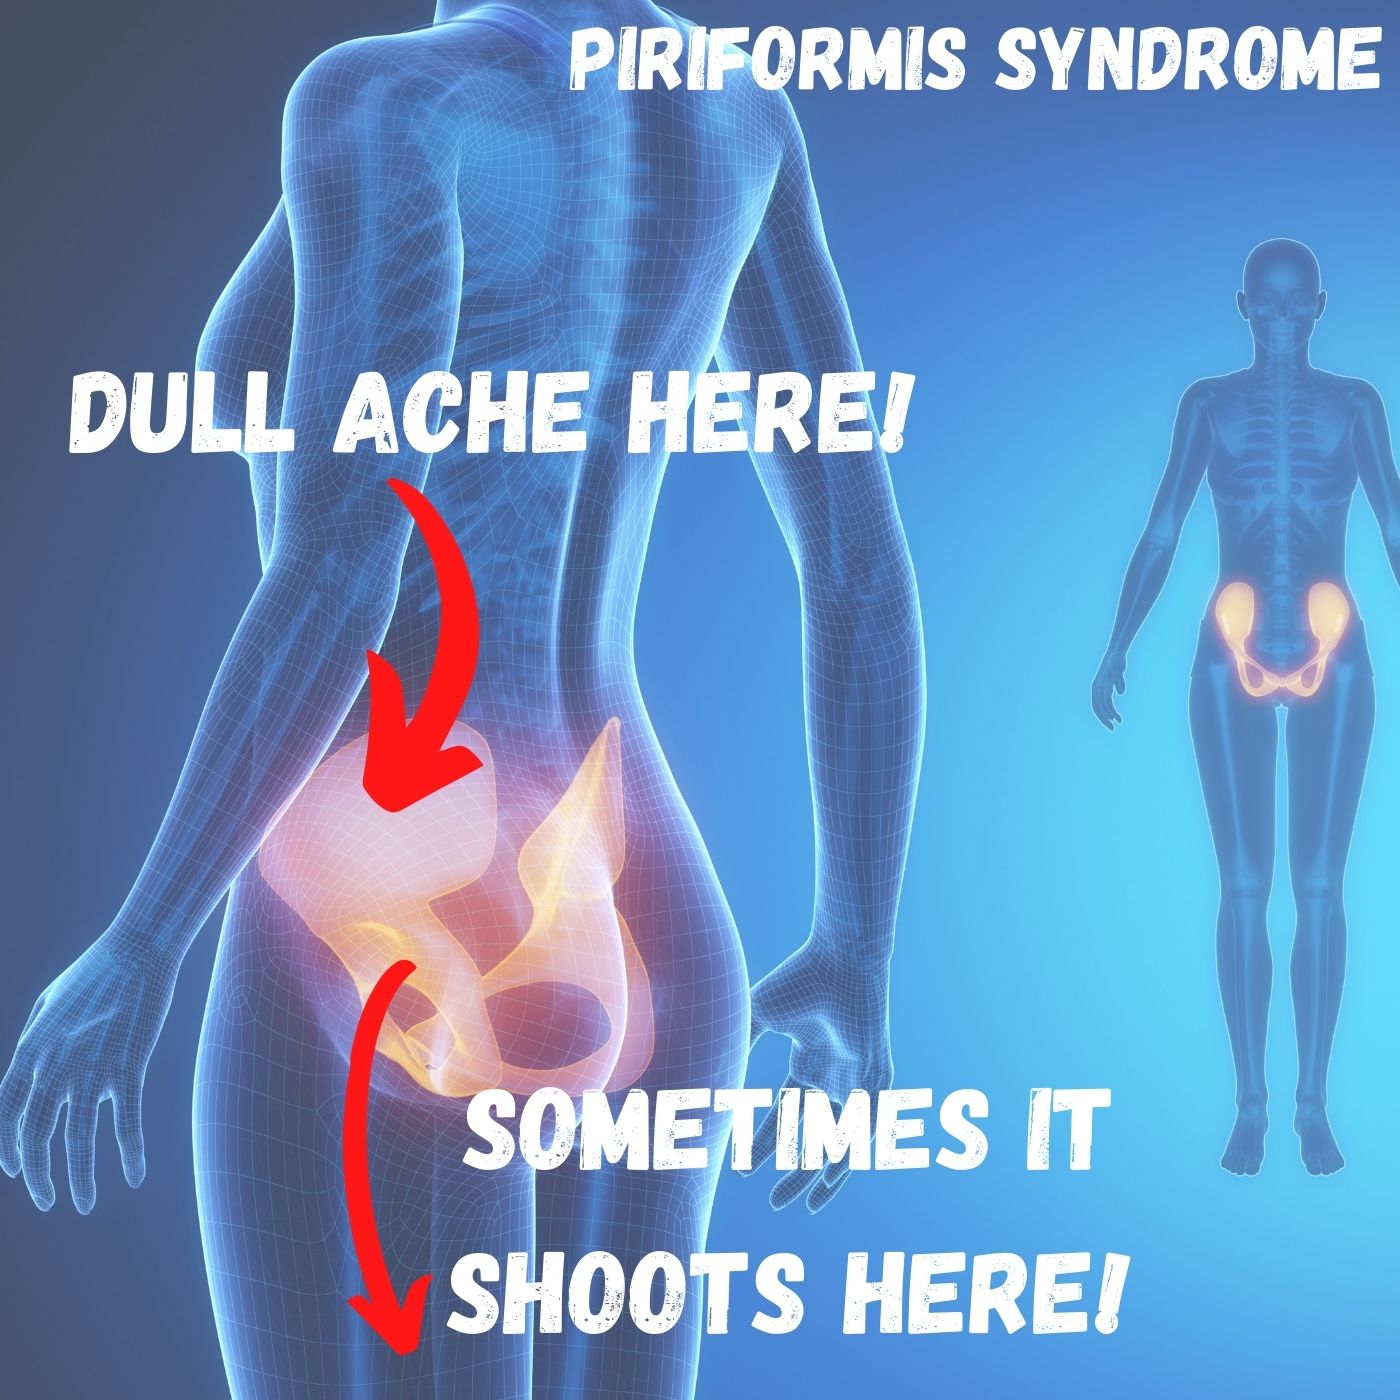 What is the end and long-lasting relief of piriformis syndrome